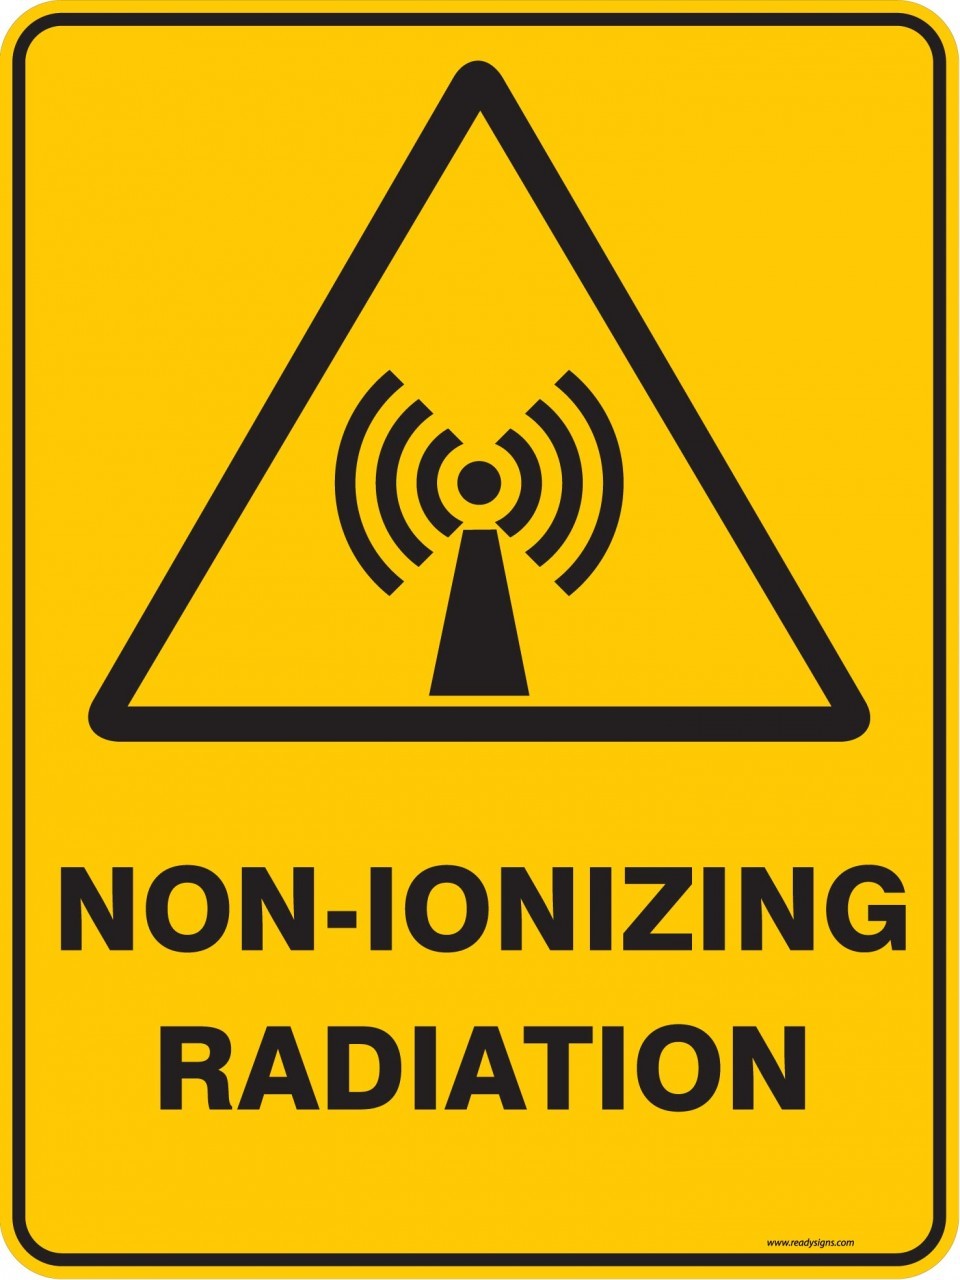 Warning Sign - NON IONIZING RADIATION - Property Signs